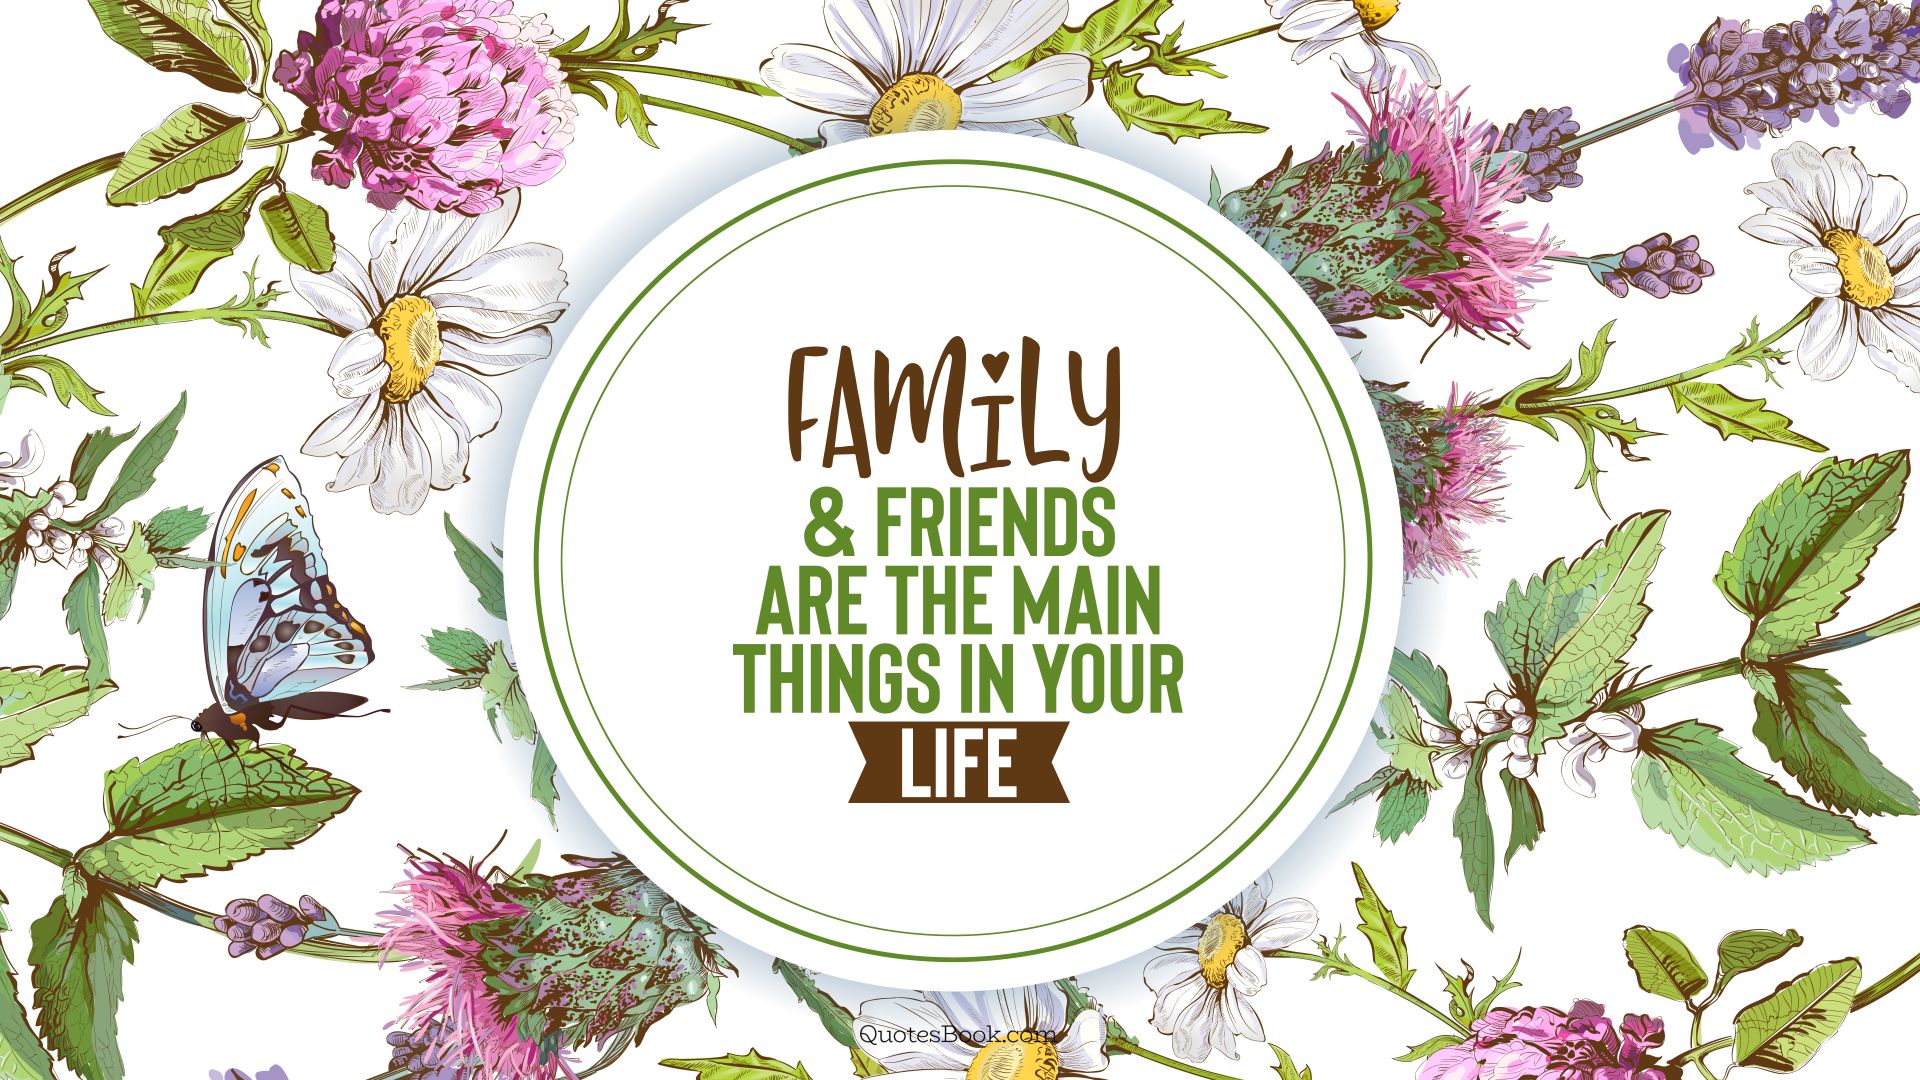 Family and friends are the main things in your life. - Quote by QuotesBook